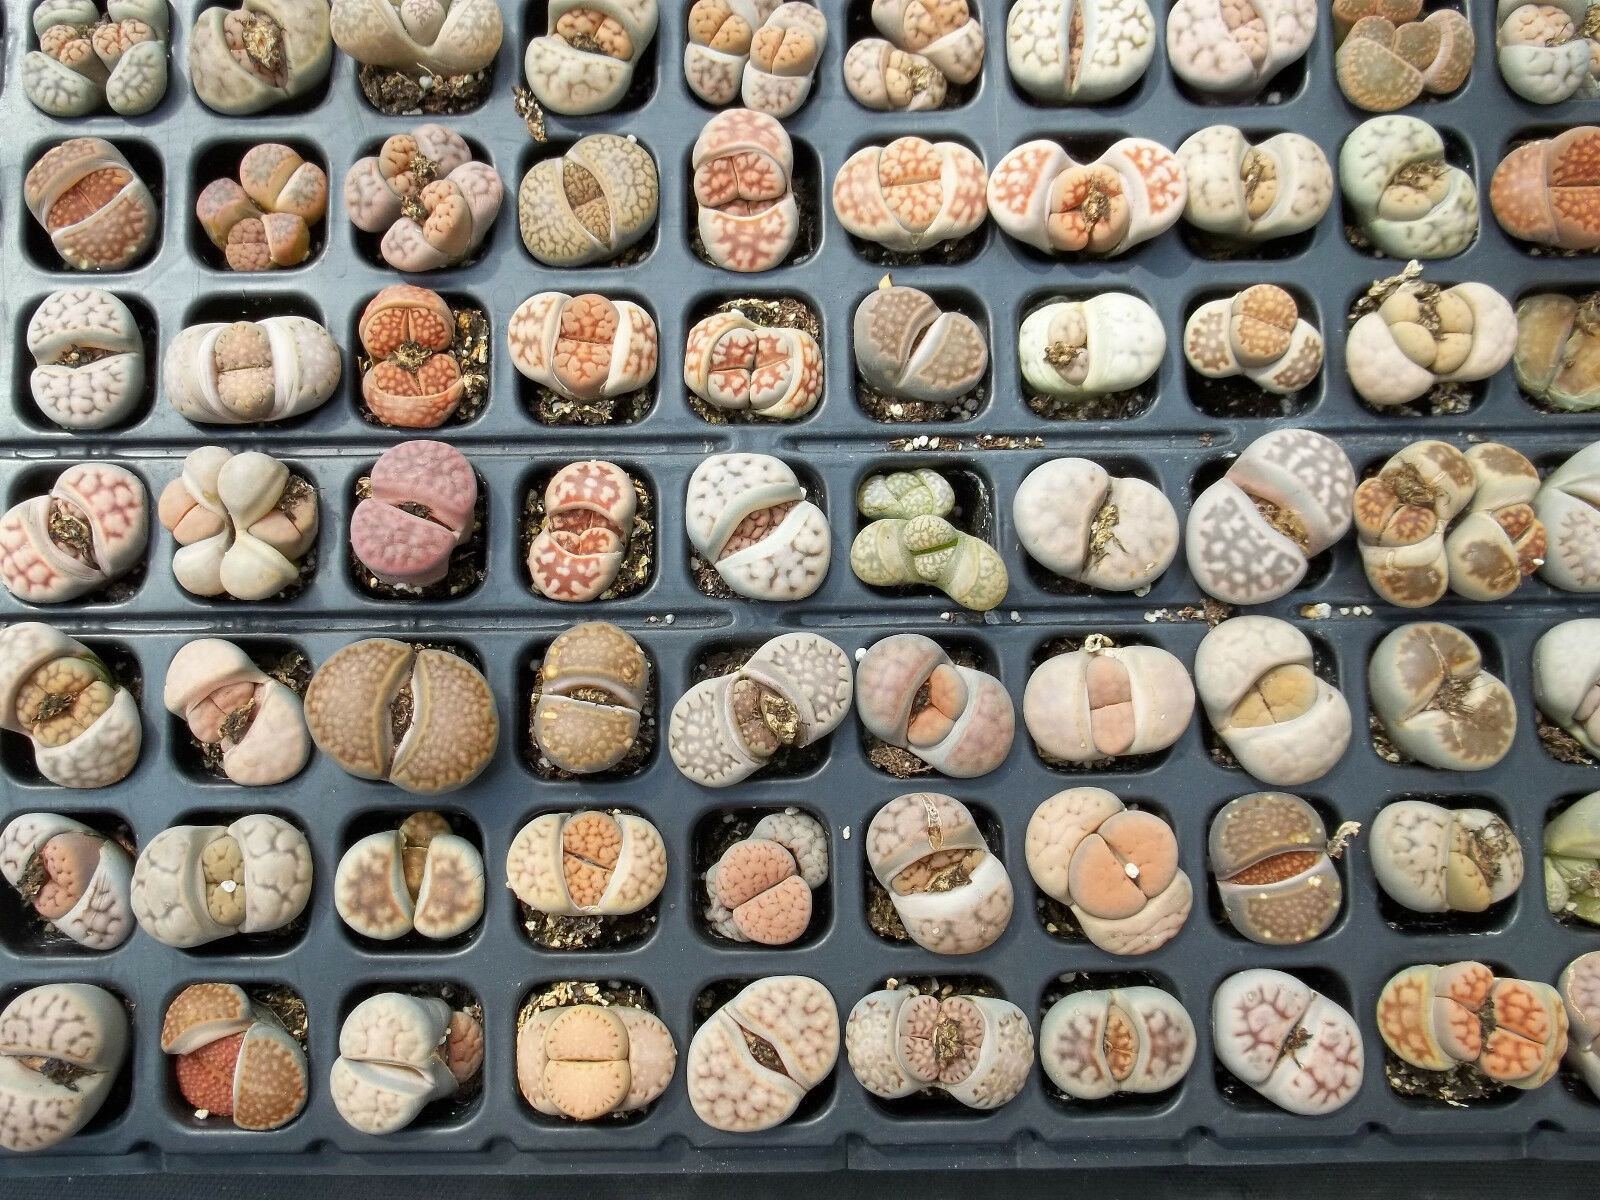 Living stones Lithops Variety MIX succulent mesembs stone cactus seed 30 SEEDS - $8.99